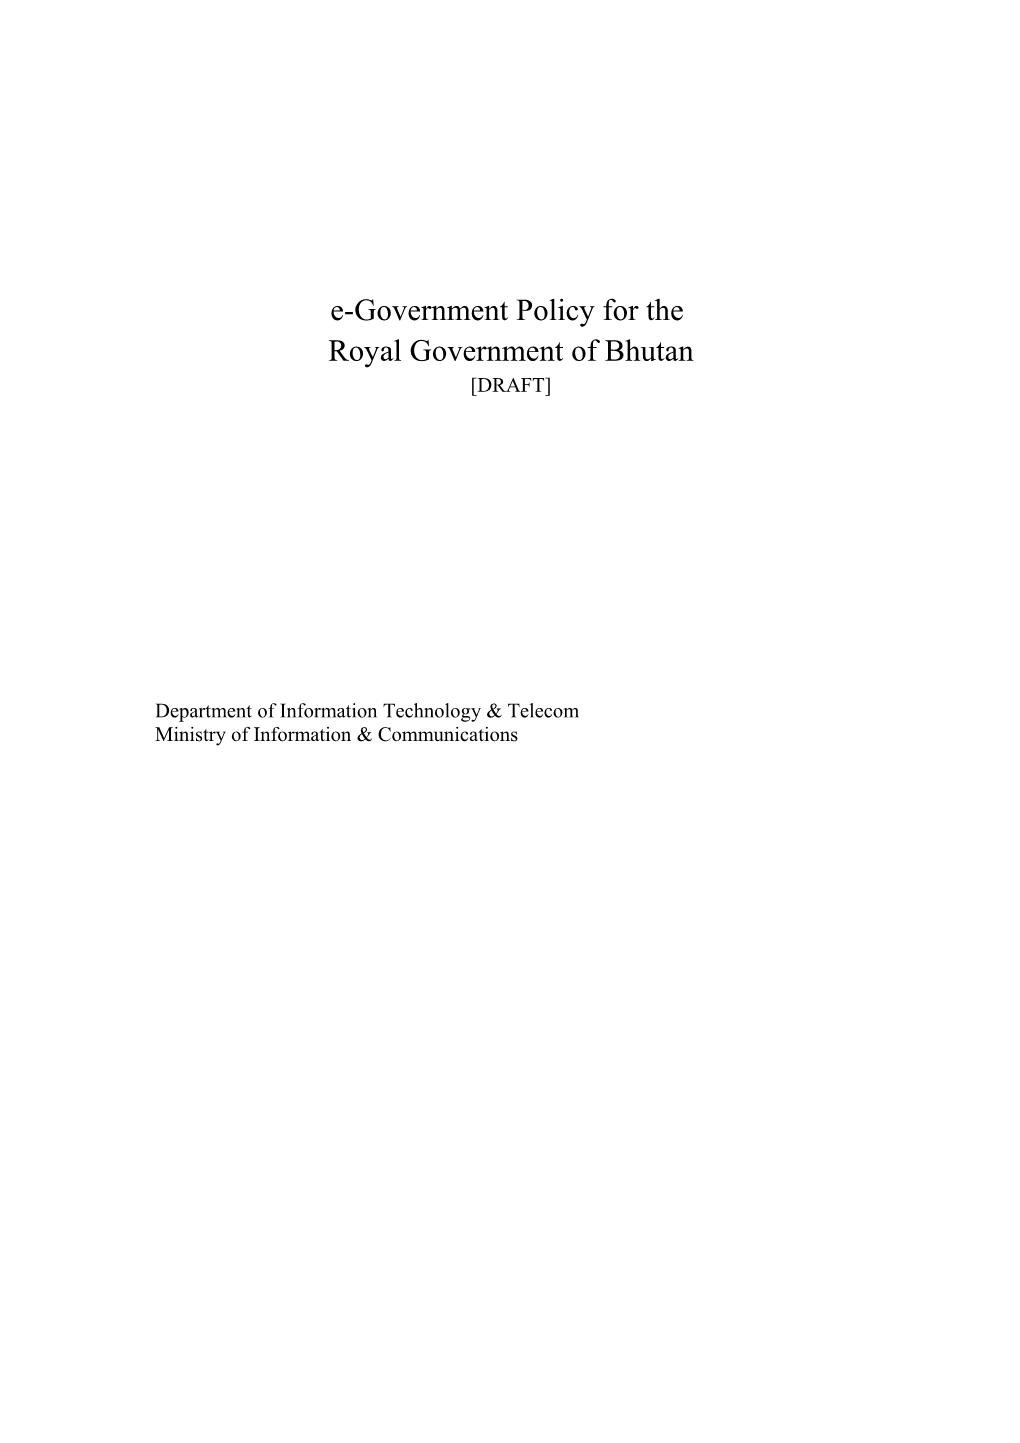 E-Government Policy for The